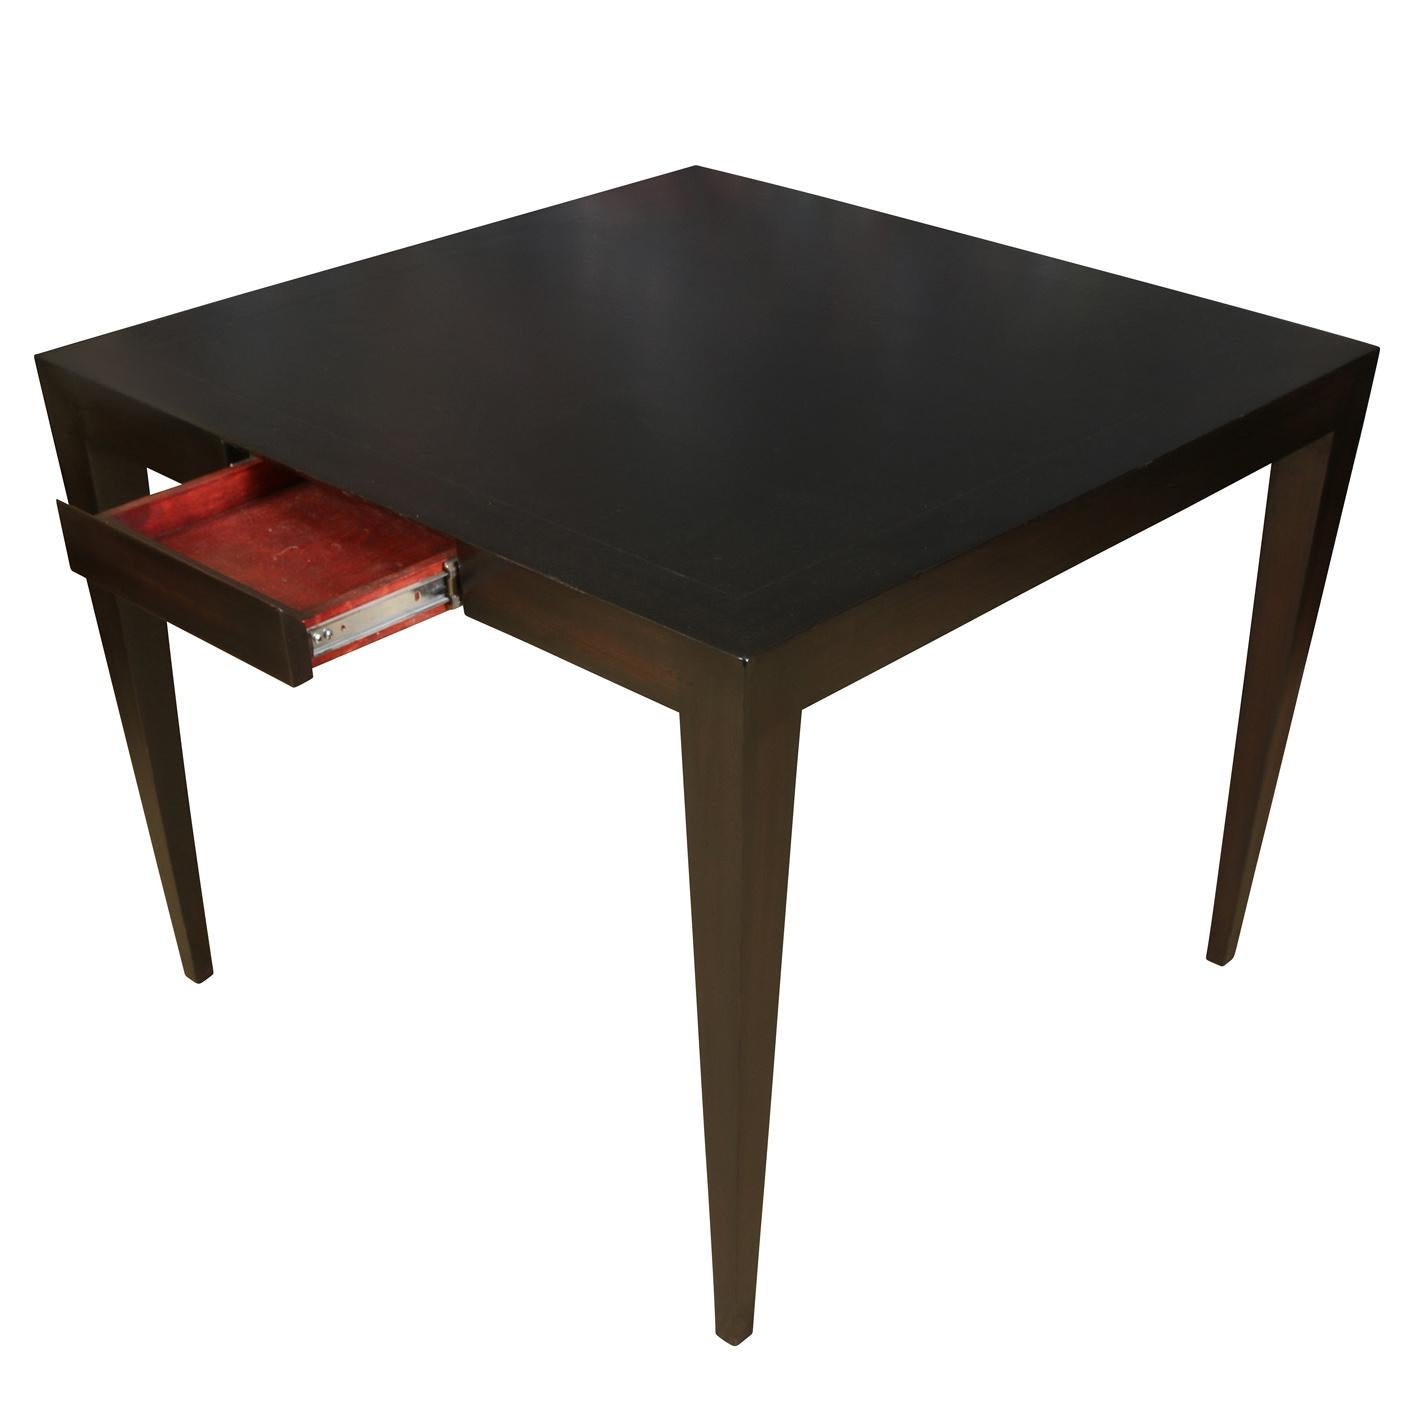 A modern ebonized games table with a single drawer.  The parsons style black table has modern tapered legs and an etched border on the top perimeter.